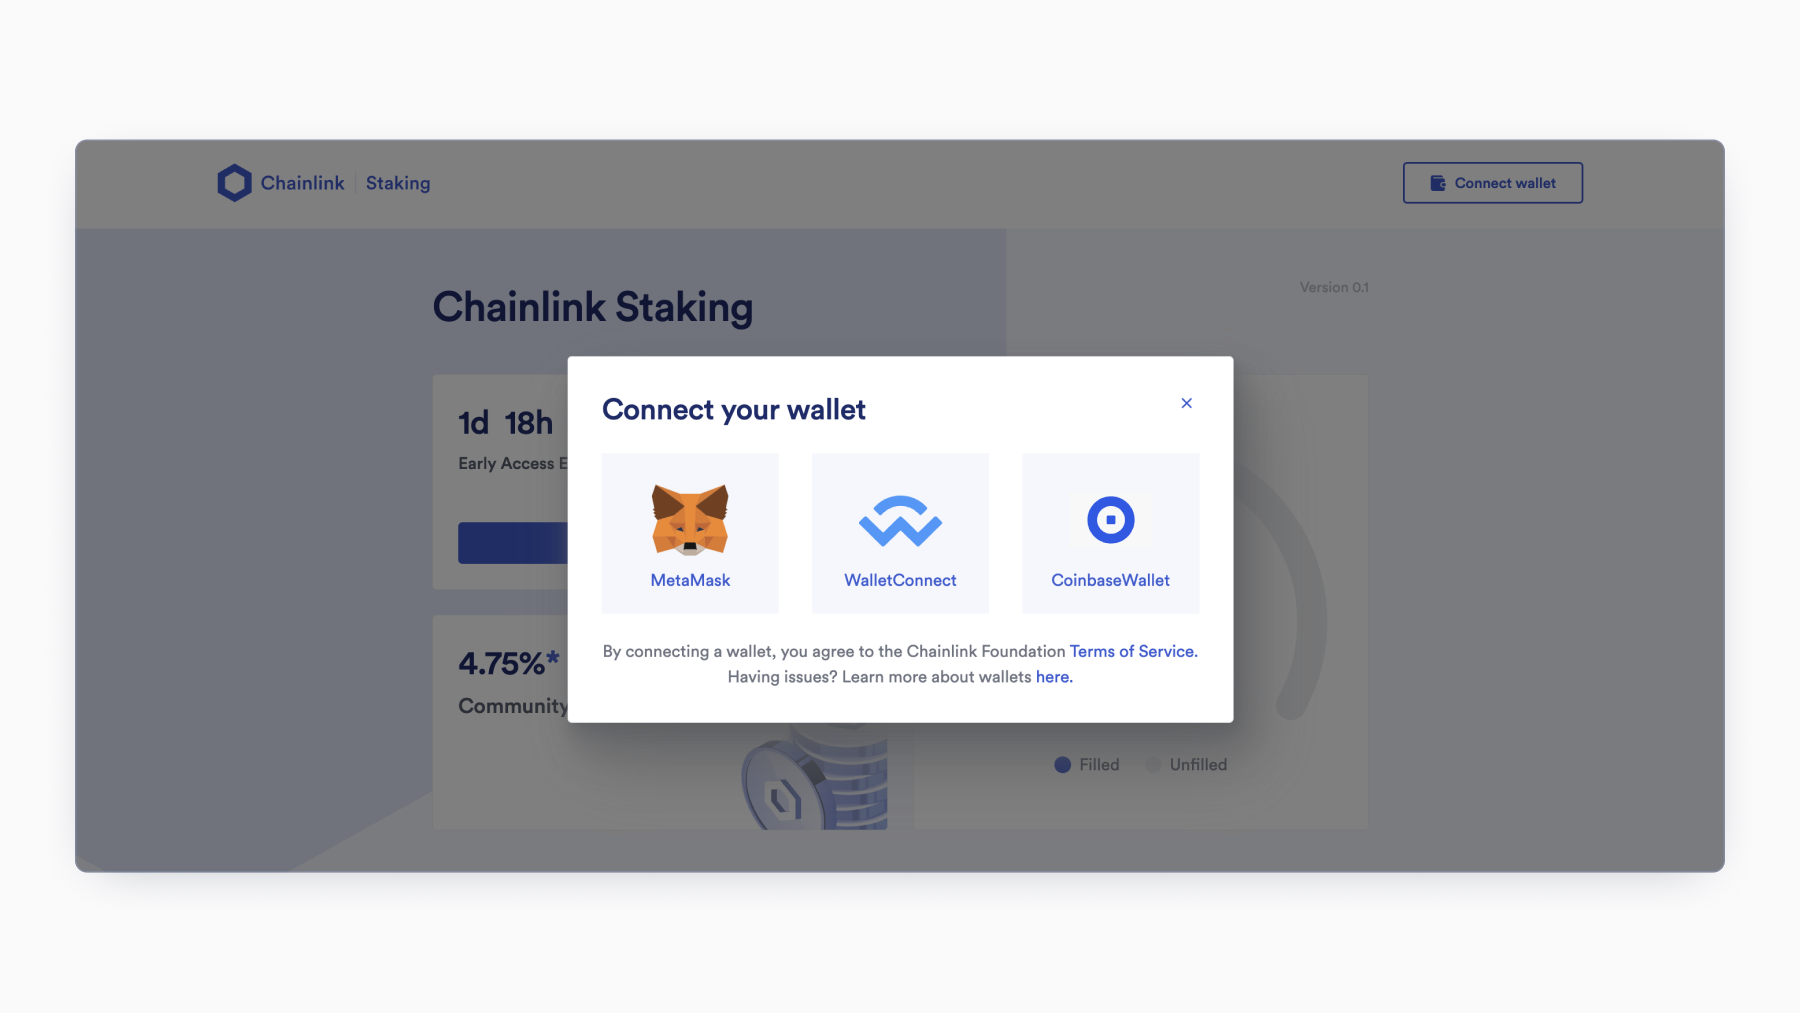 Screenshot of wallet choices when connecting wallet on Chainlink Staking